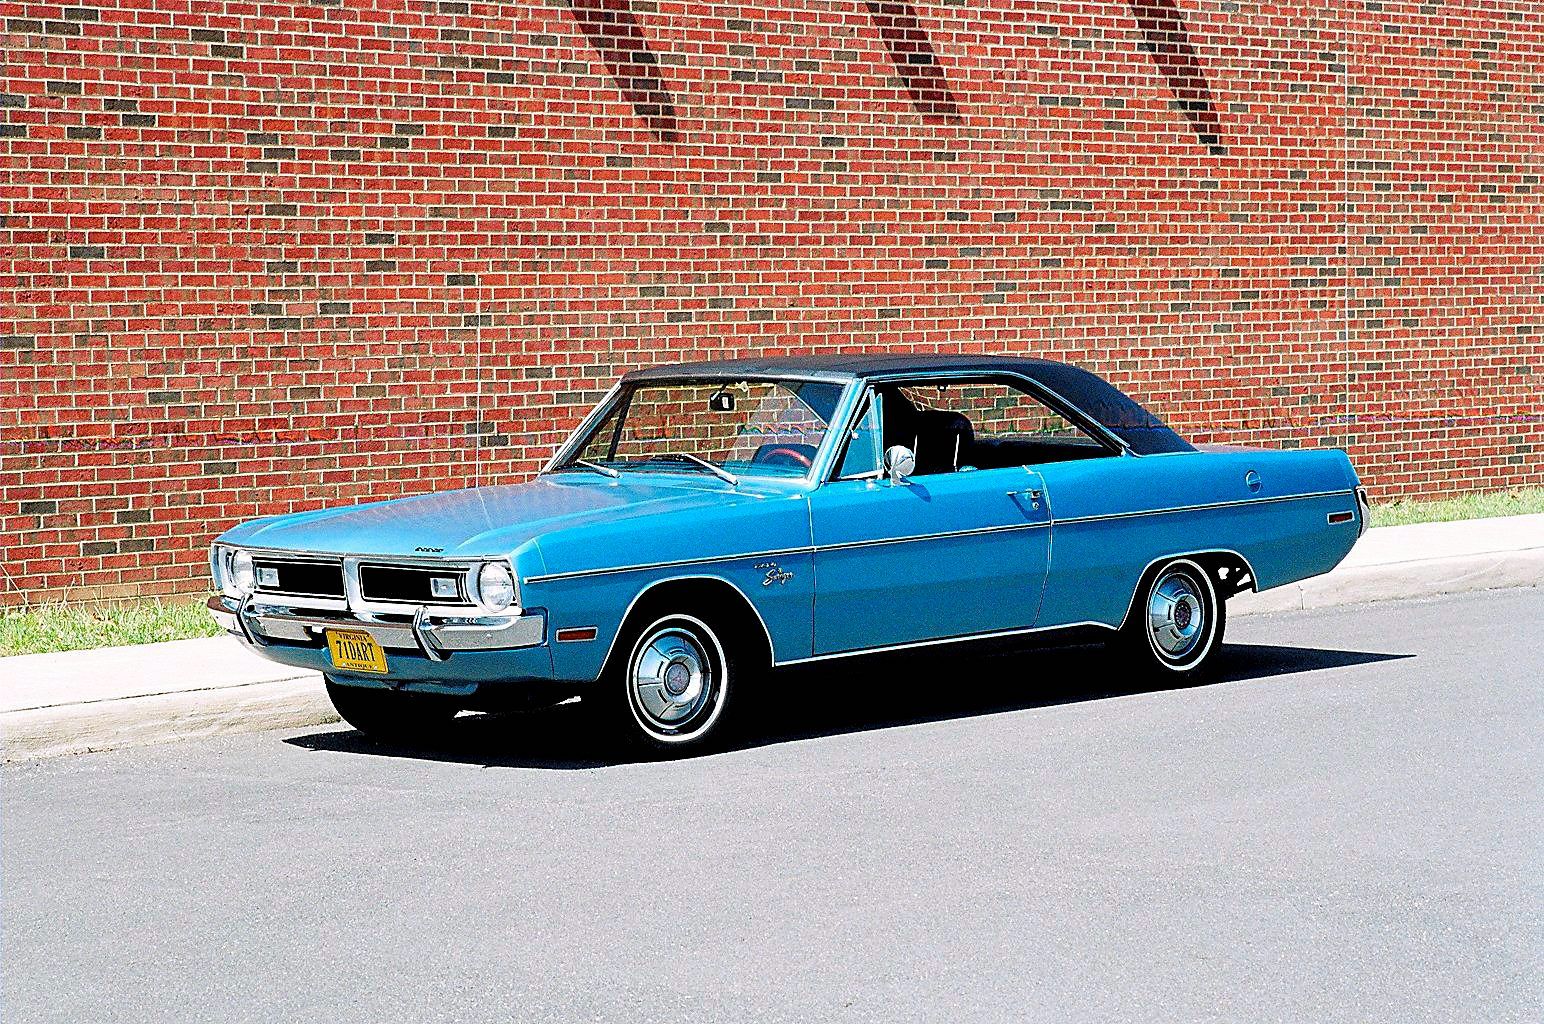 1971 Dodge Dart is keeping up with the Joneses picture